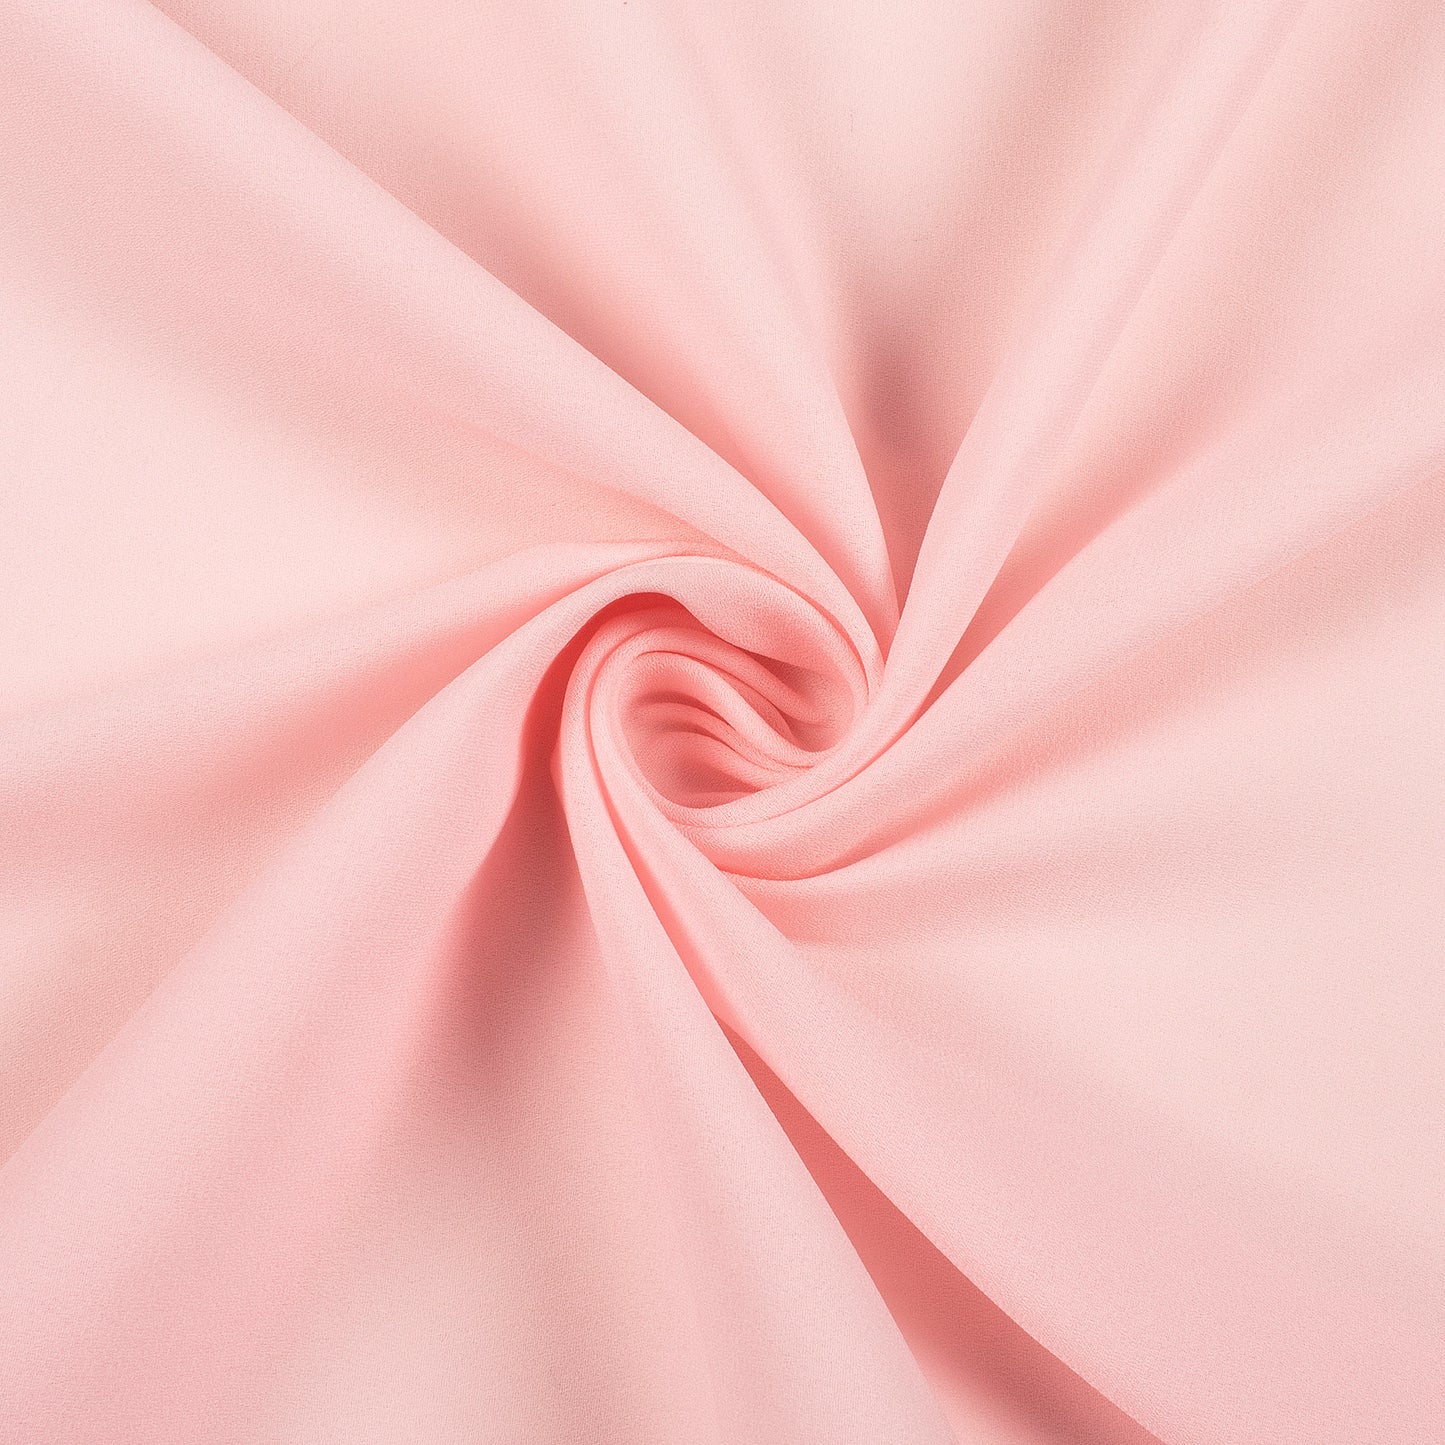 Light Pink Plain Moss Georgette Fabric (Width 54 Inches)